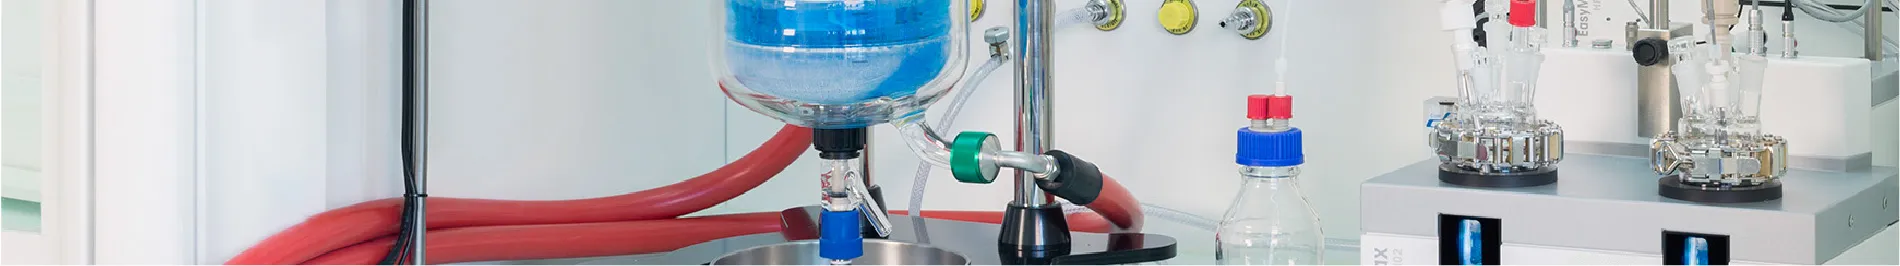 Mettler Toledo Automated Synthesis & Process Development Header